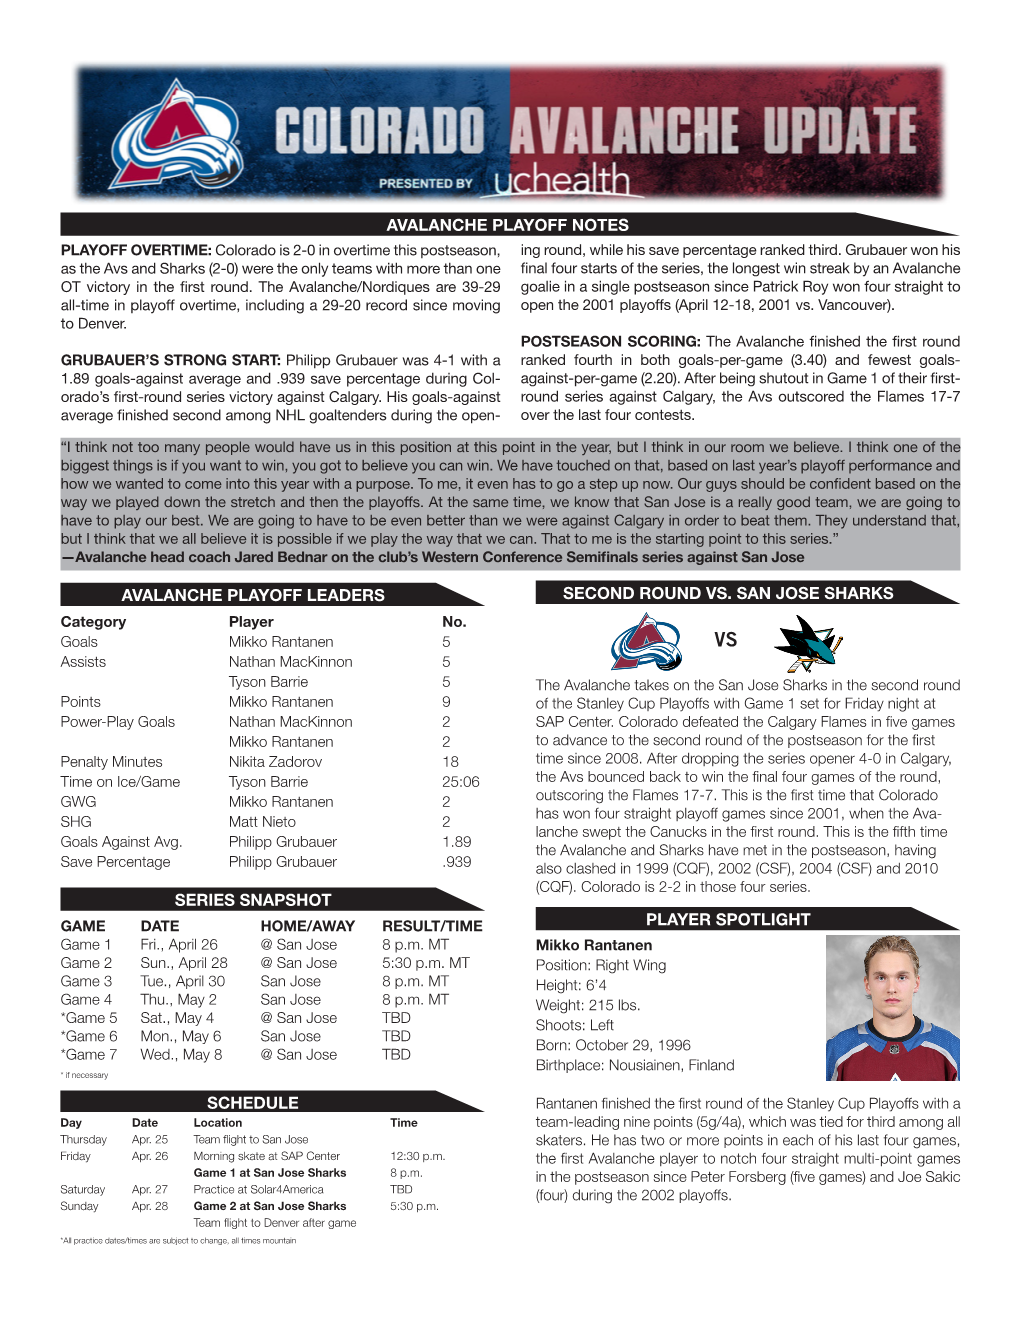 Avalanche Playoff Leaders Series Snapshot Second Round Vs. San Jose Sharks Schedule Avalanche Playoff Notes Player Spotlight